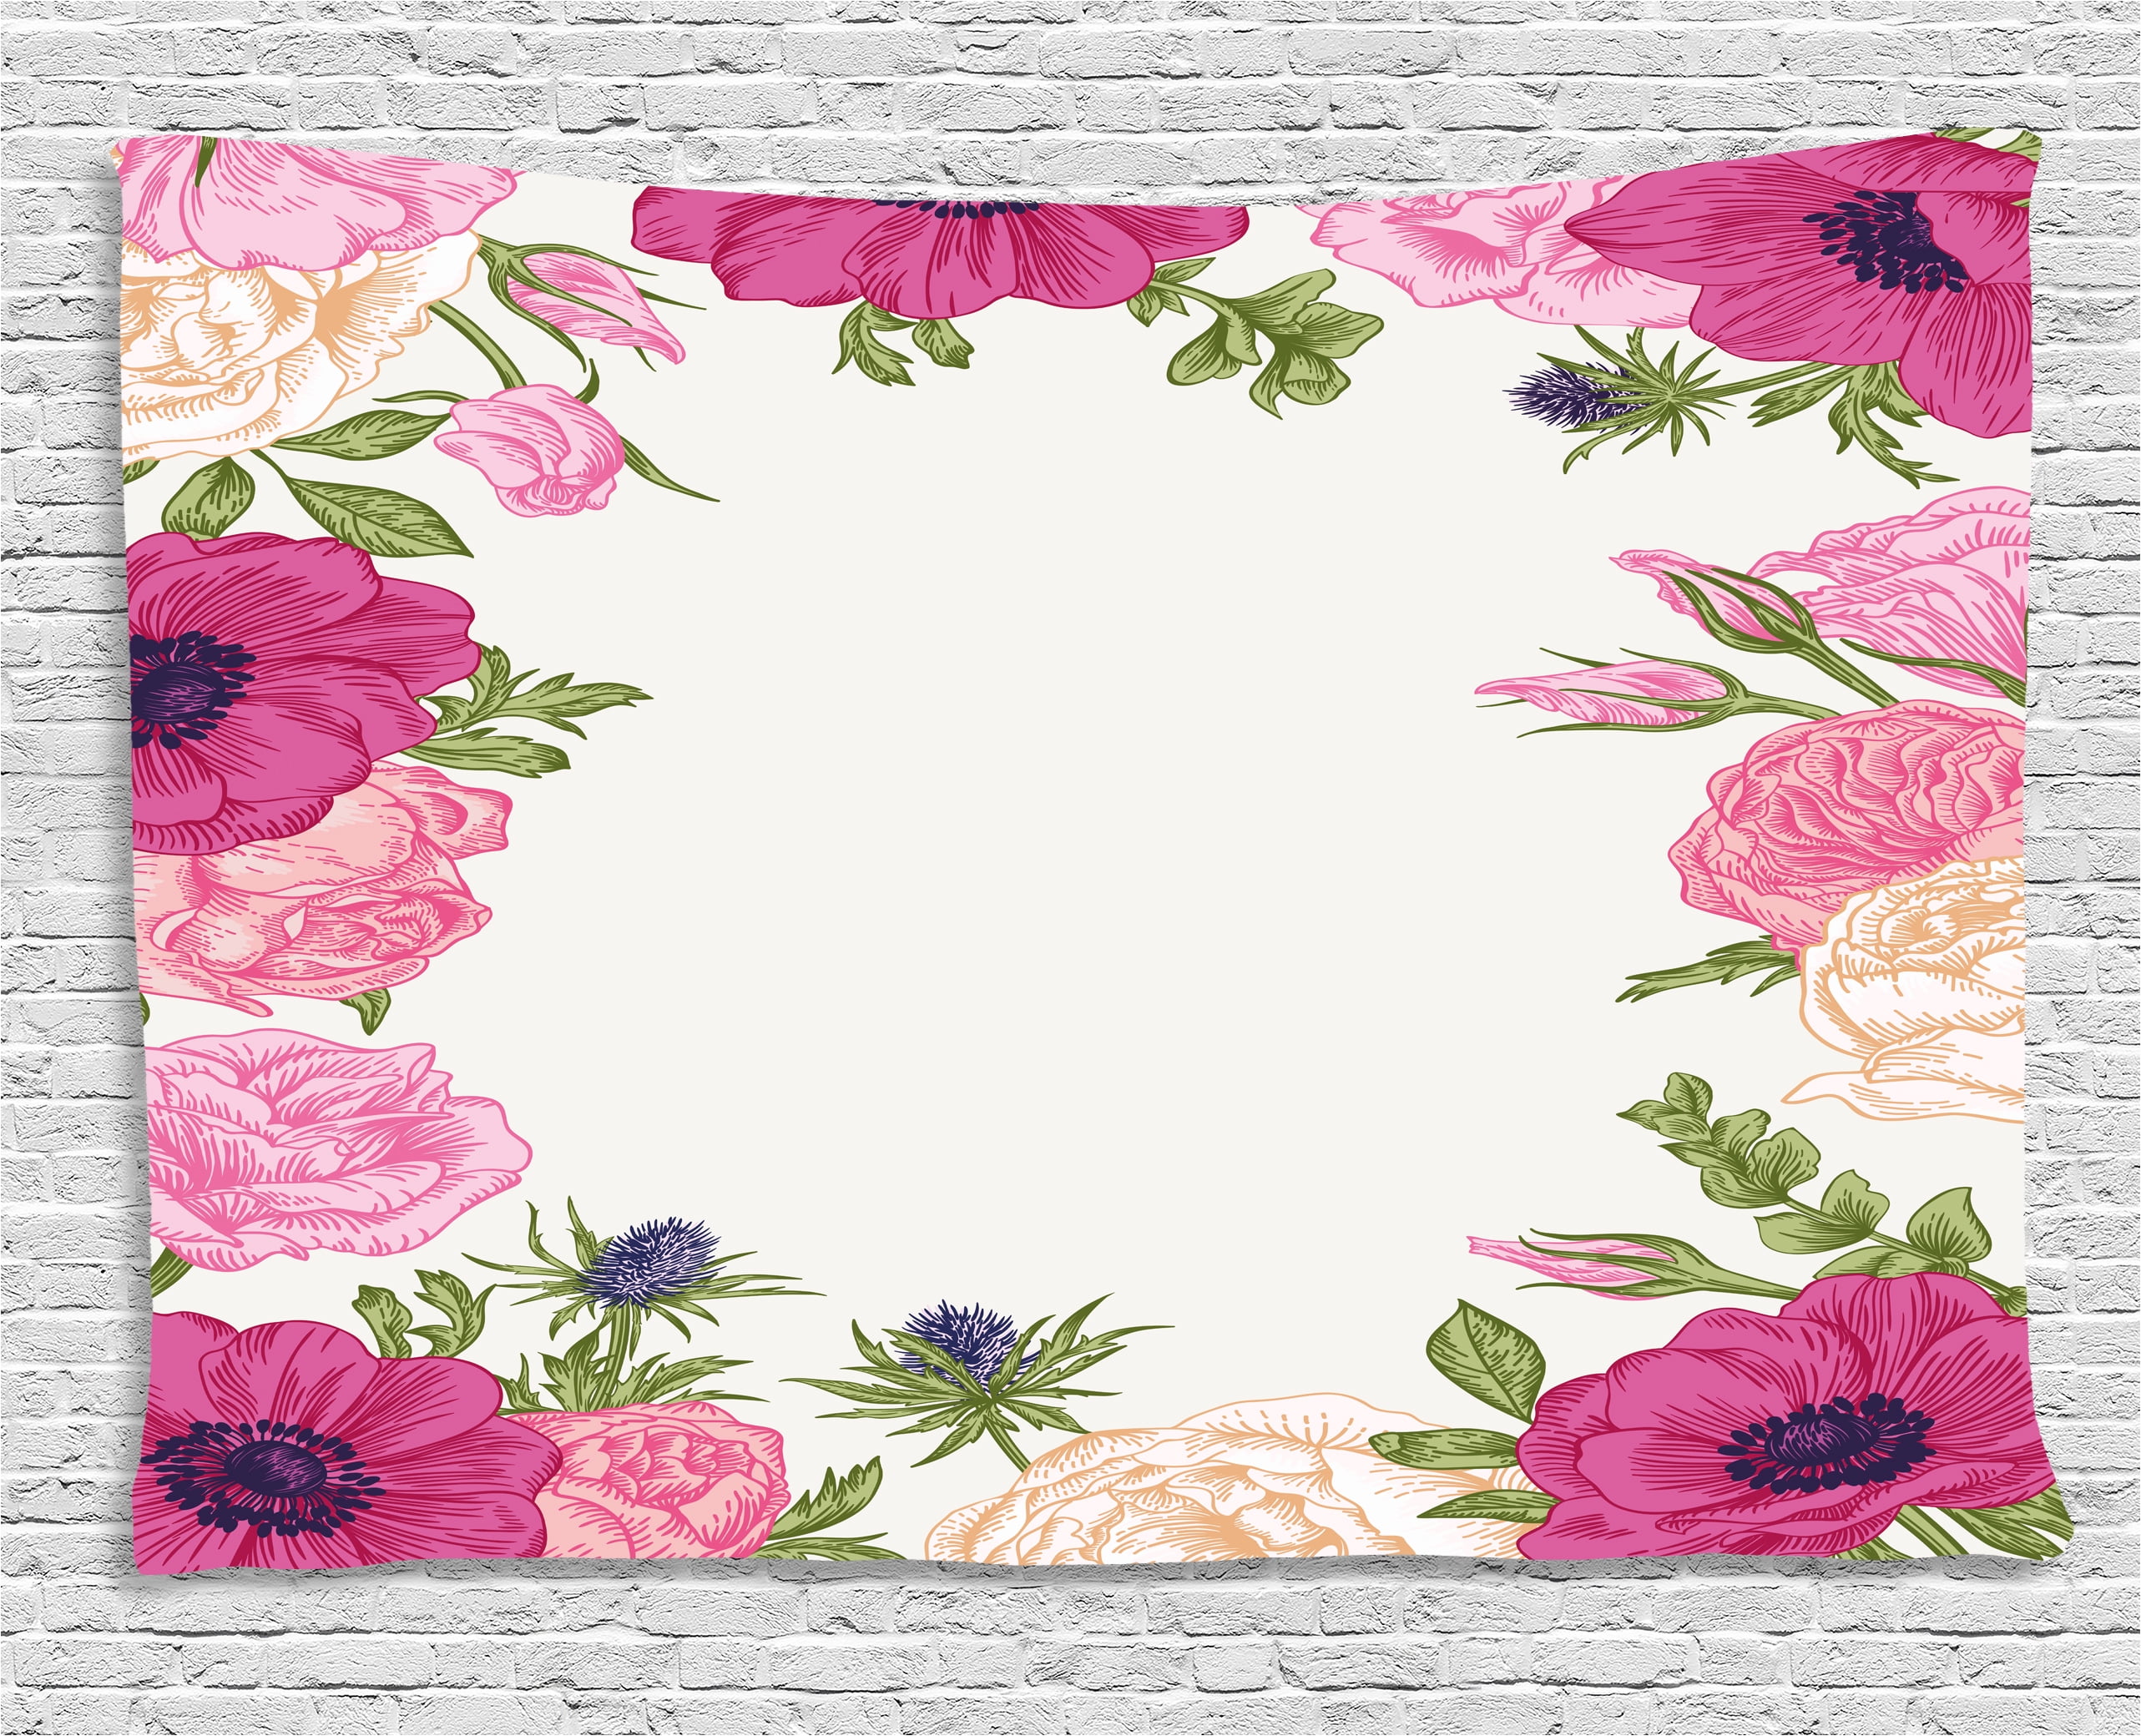 Anemone Flower Tapestry Pink Rose And Anemone Flowers Frame Lively